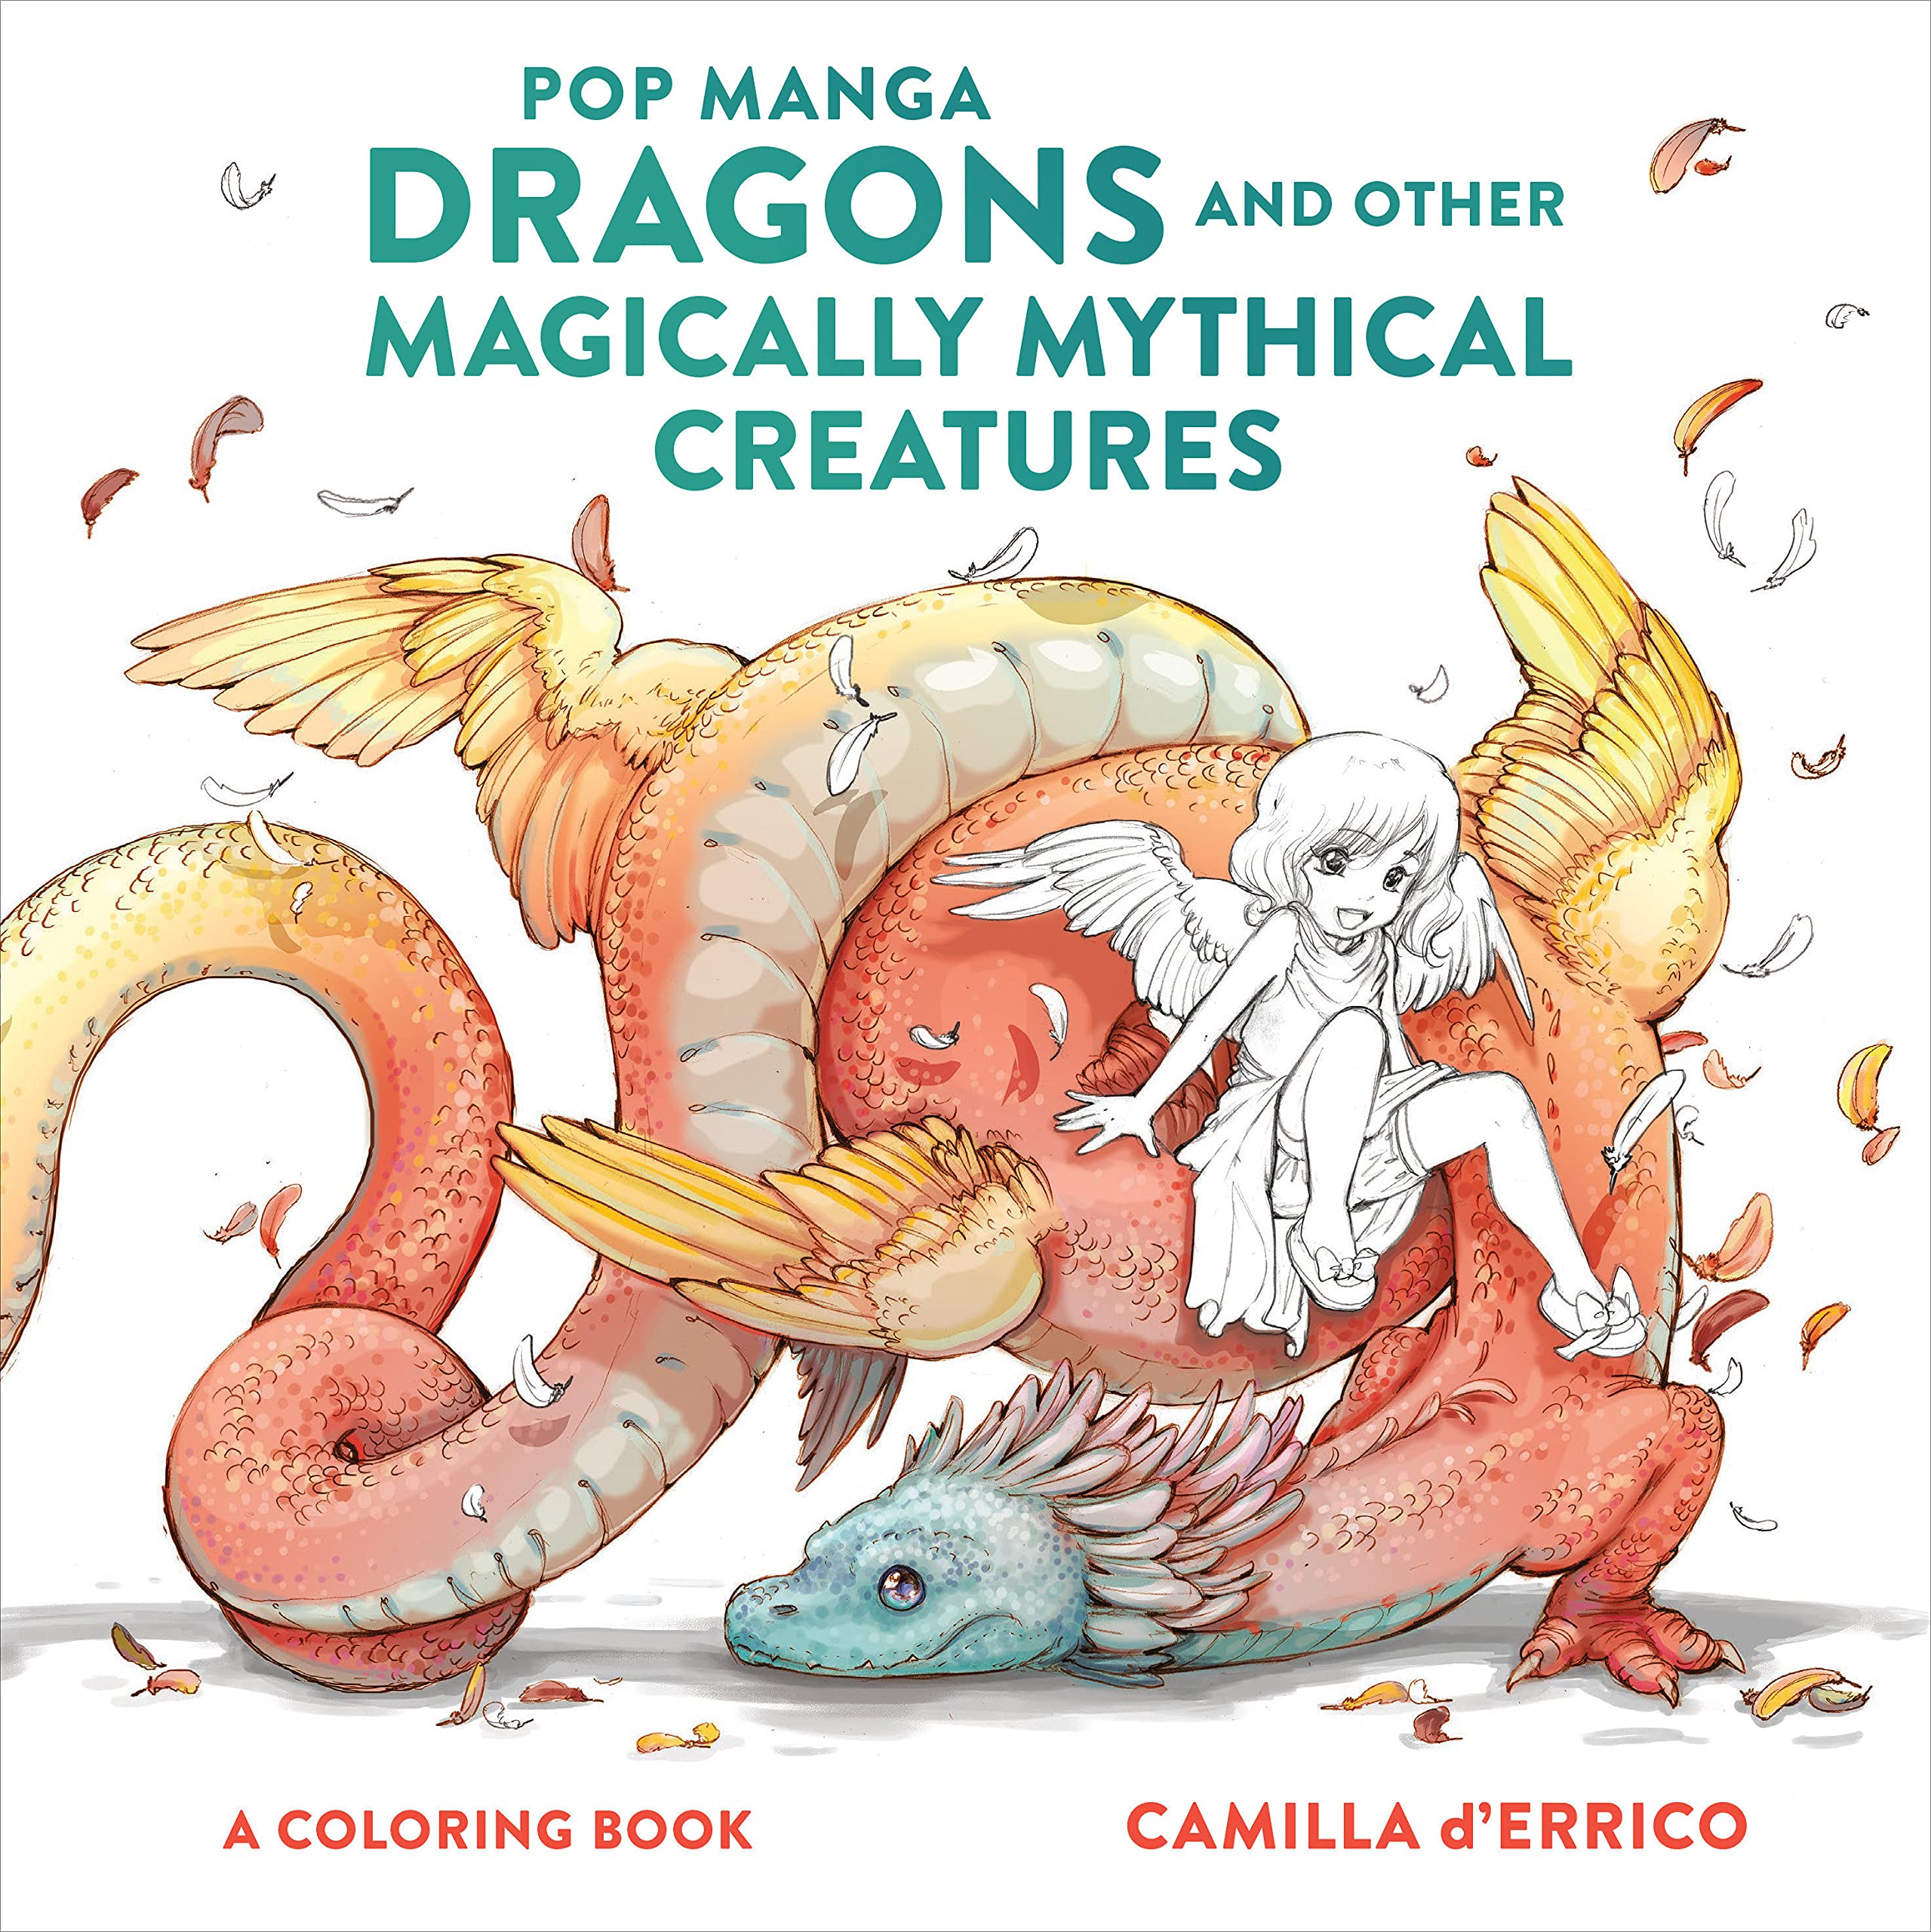 Pop Manga Dragons and Other Magically Mythical Creatures - A Coloring Book | Camilla d’Errico